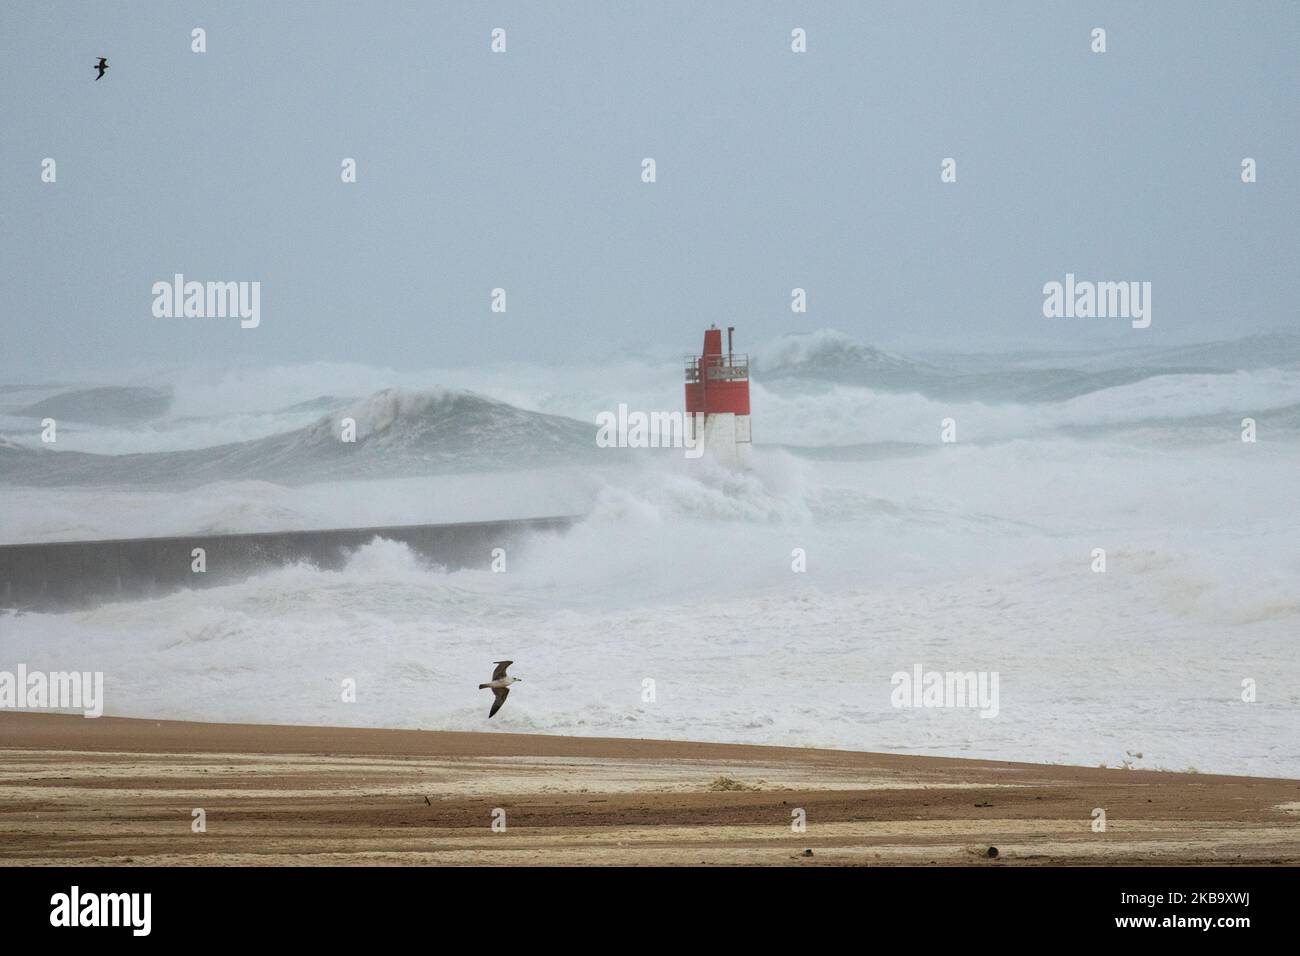 Waves break over the lighthouse in Capbreton near the ocean on November 3, 2019 during the Amelie storm. Some 100,000 households were deprived of electricity in south western France, where the Atlantic coast was swept by storm Amelie, causing damage but no casualties, according to an initial assessment by the emergency services and the prefectures. (Photo by Jerome Gilles/NurPhoto) Stock Photo